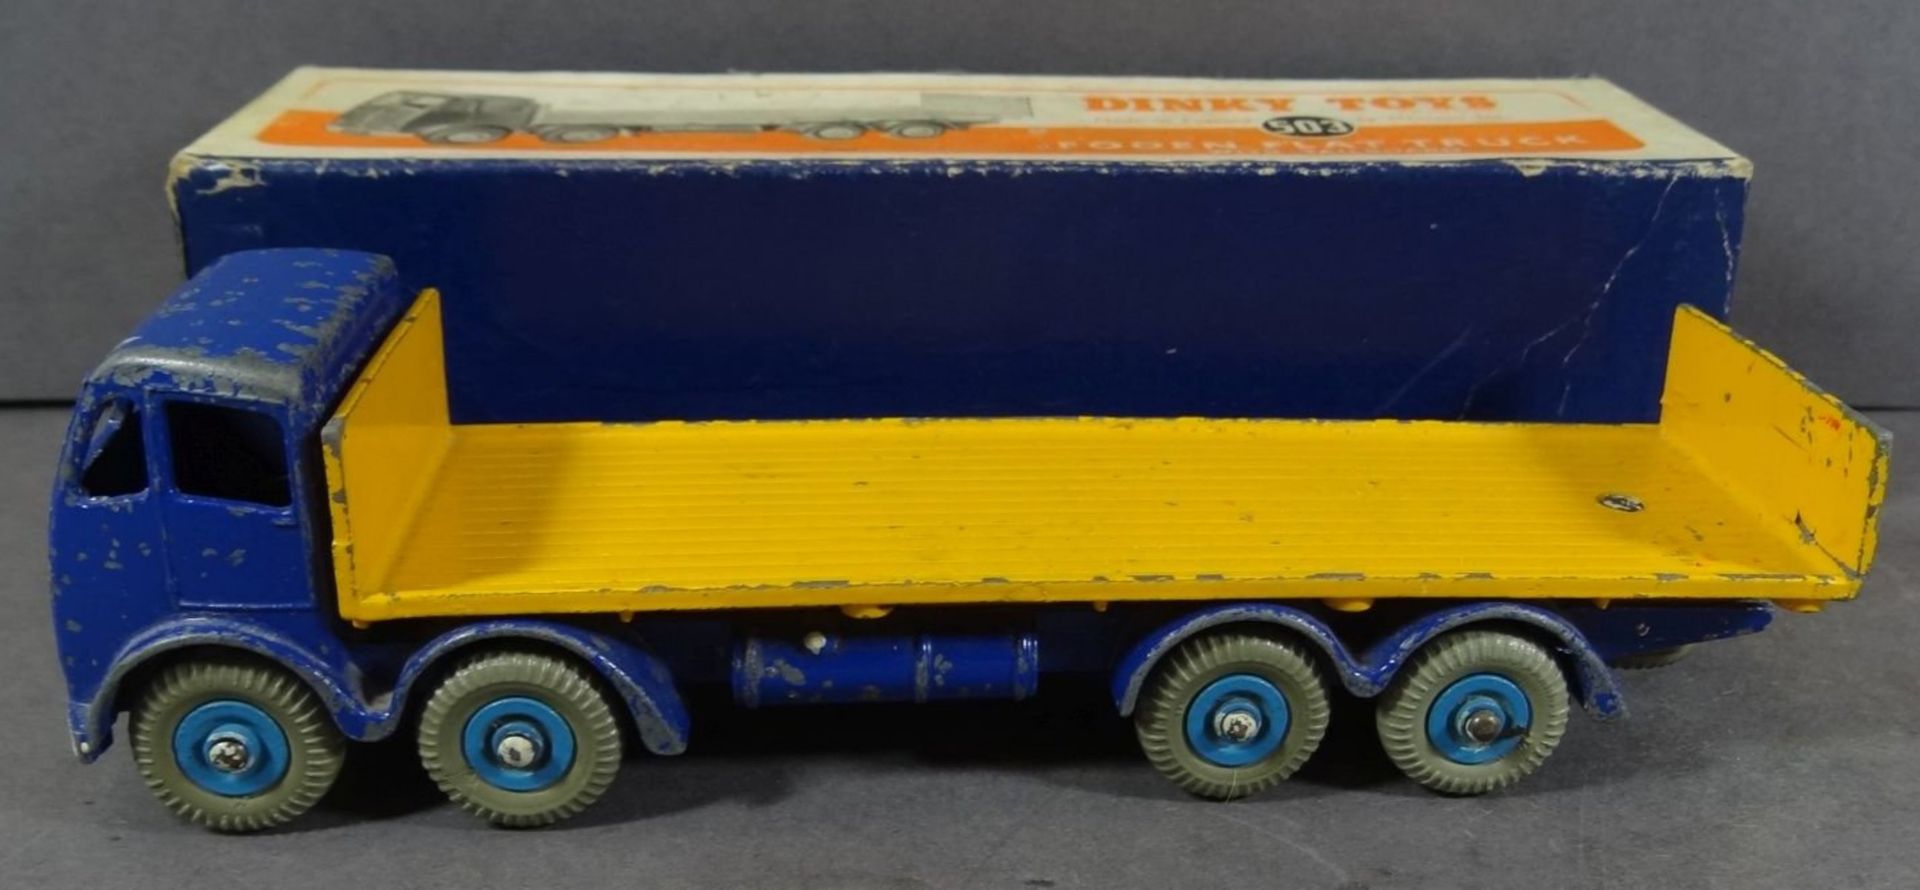 Dinky Toys 503 Foden Flat Truck in OVP, bespielte Erhaltung - Image 2 of 6